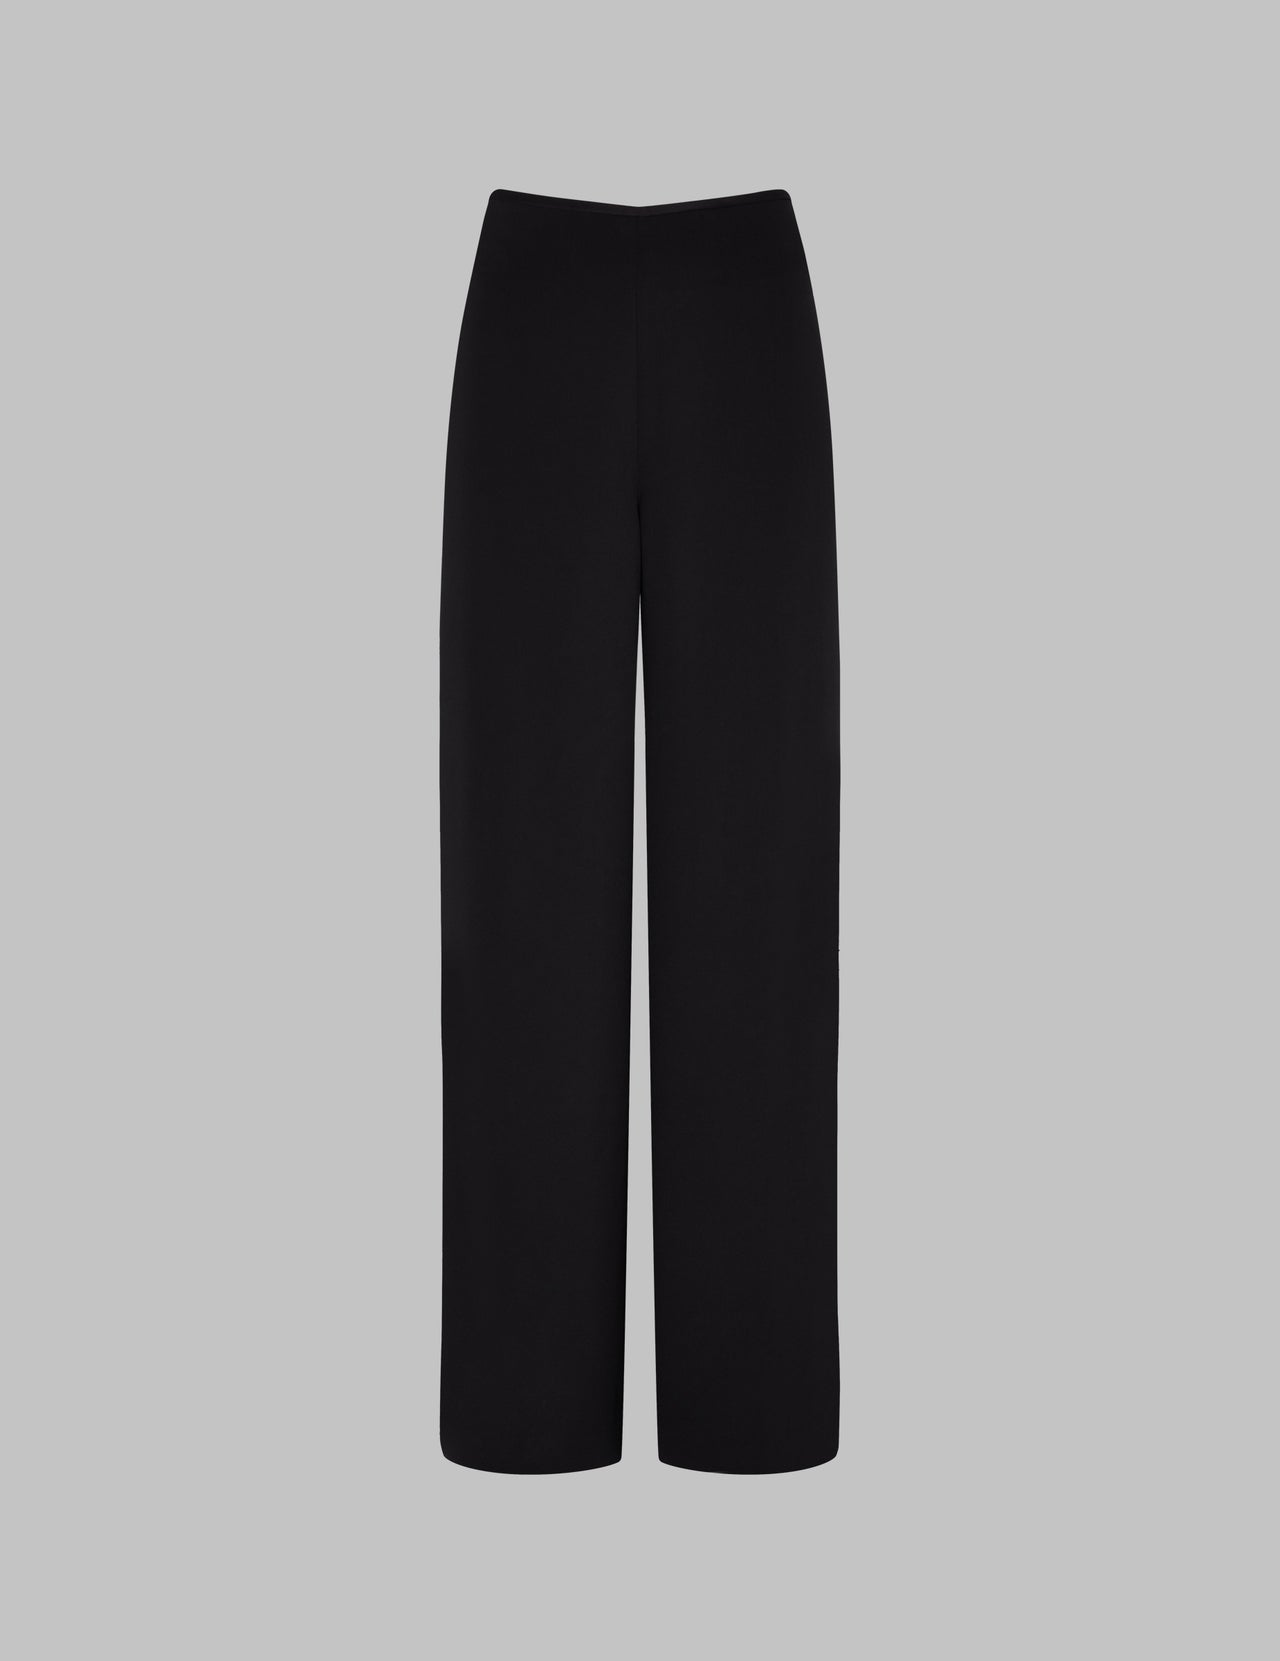  Black Silk Crepe Nadia Trouser With Thin Waistband 